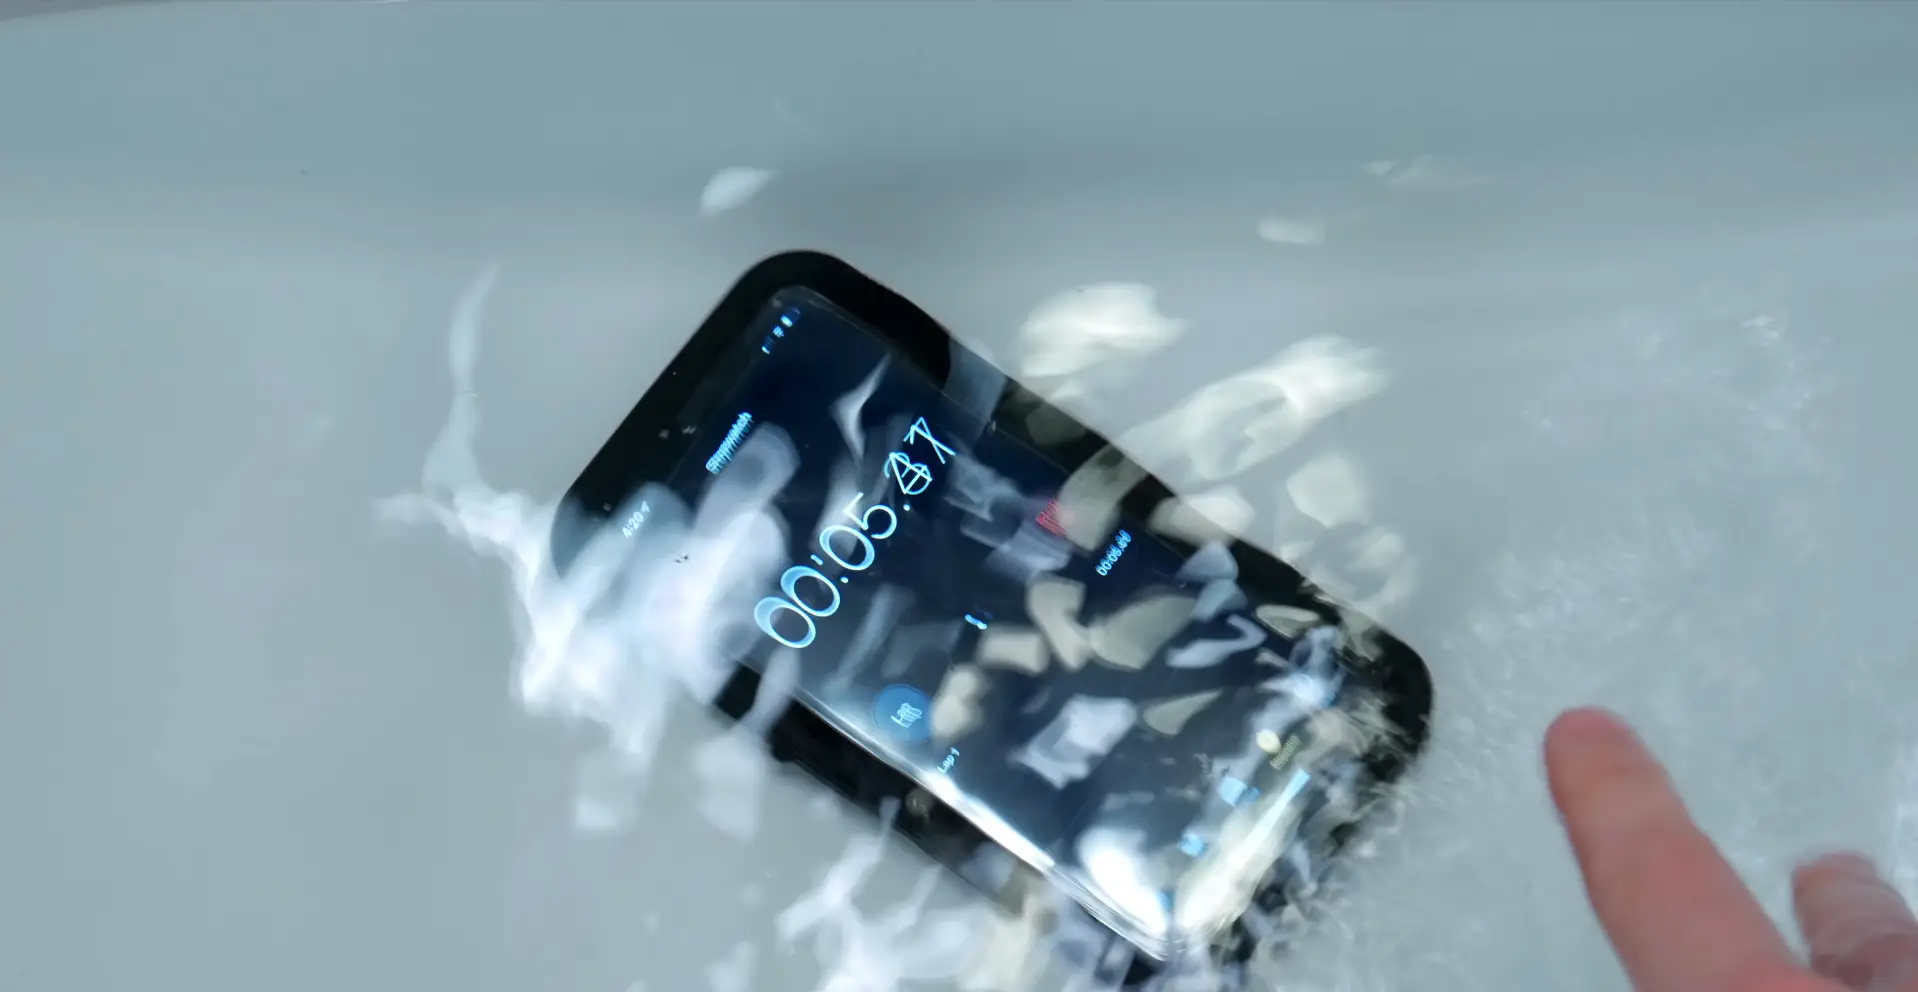 Ability to Use Your Phone in the Rain or Pool